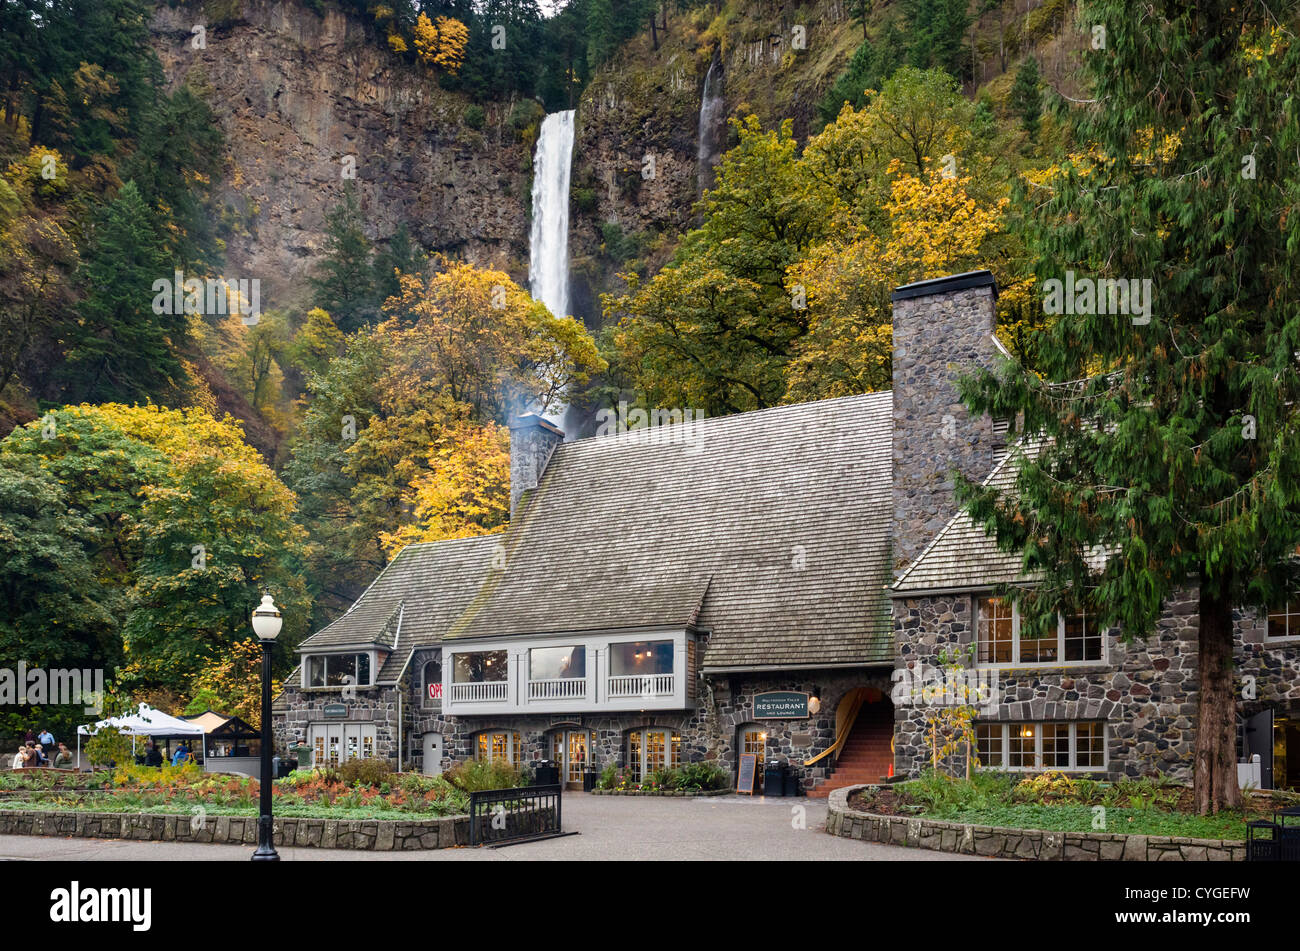 The Information Center, Gift Shop and Restaurant in front of Multnomah Falls, Columbia River Gorge, Oregon, USA Stock Photo